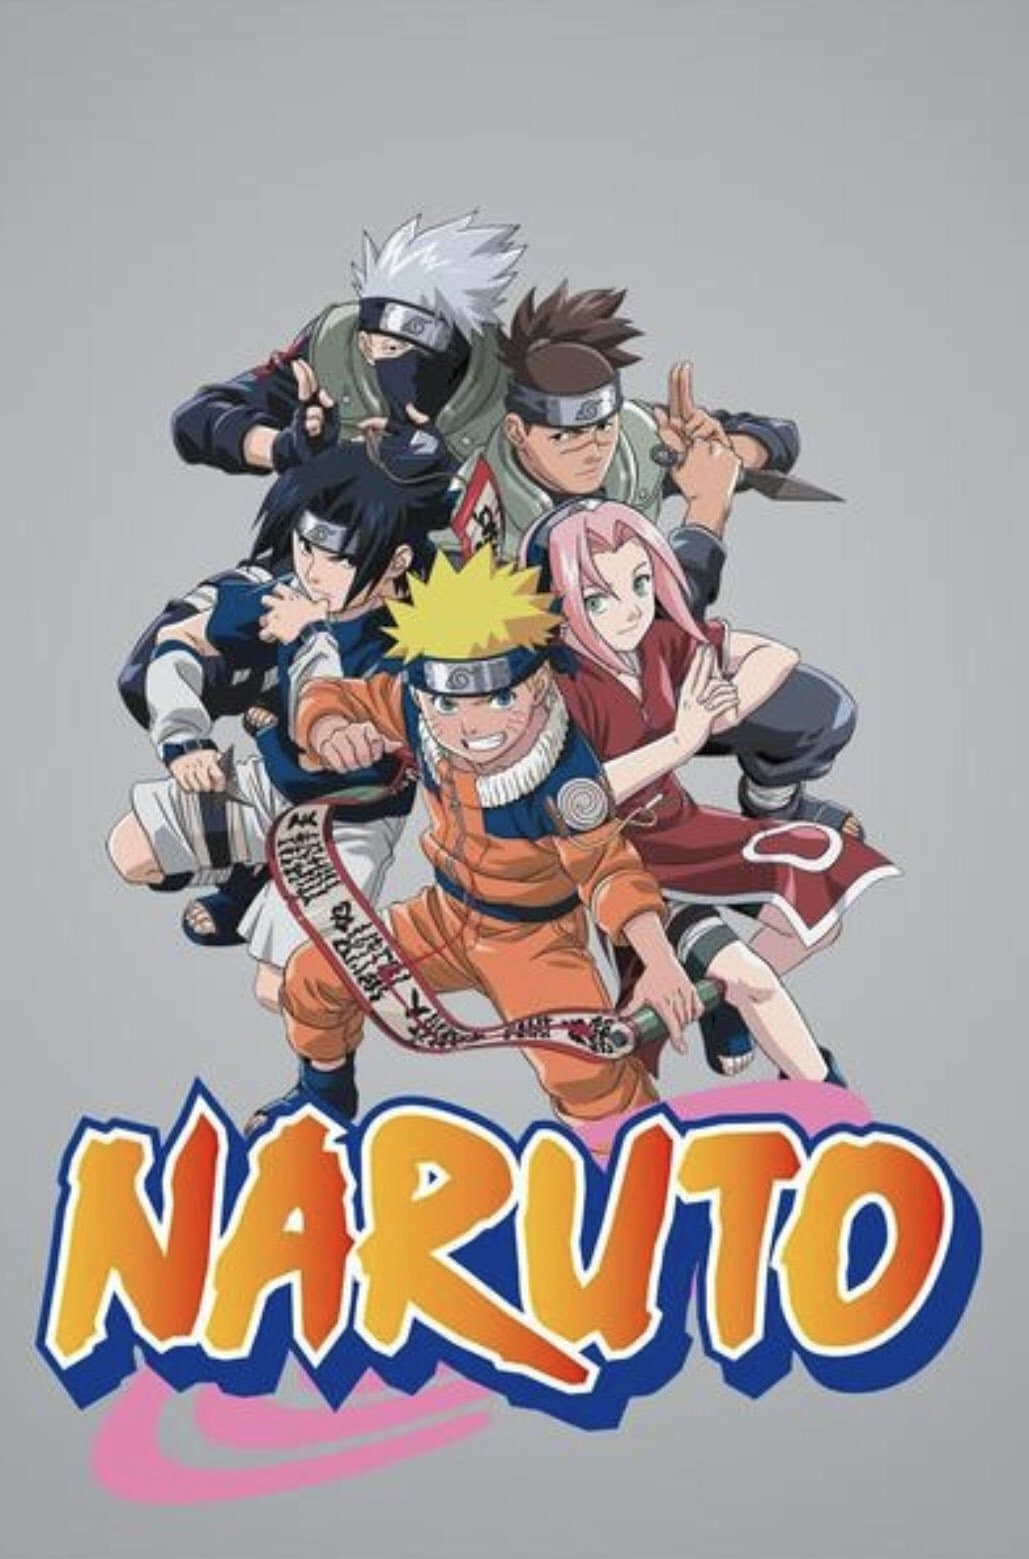  Naruto  TV Show  Poster ID 349259 Image Abyss